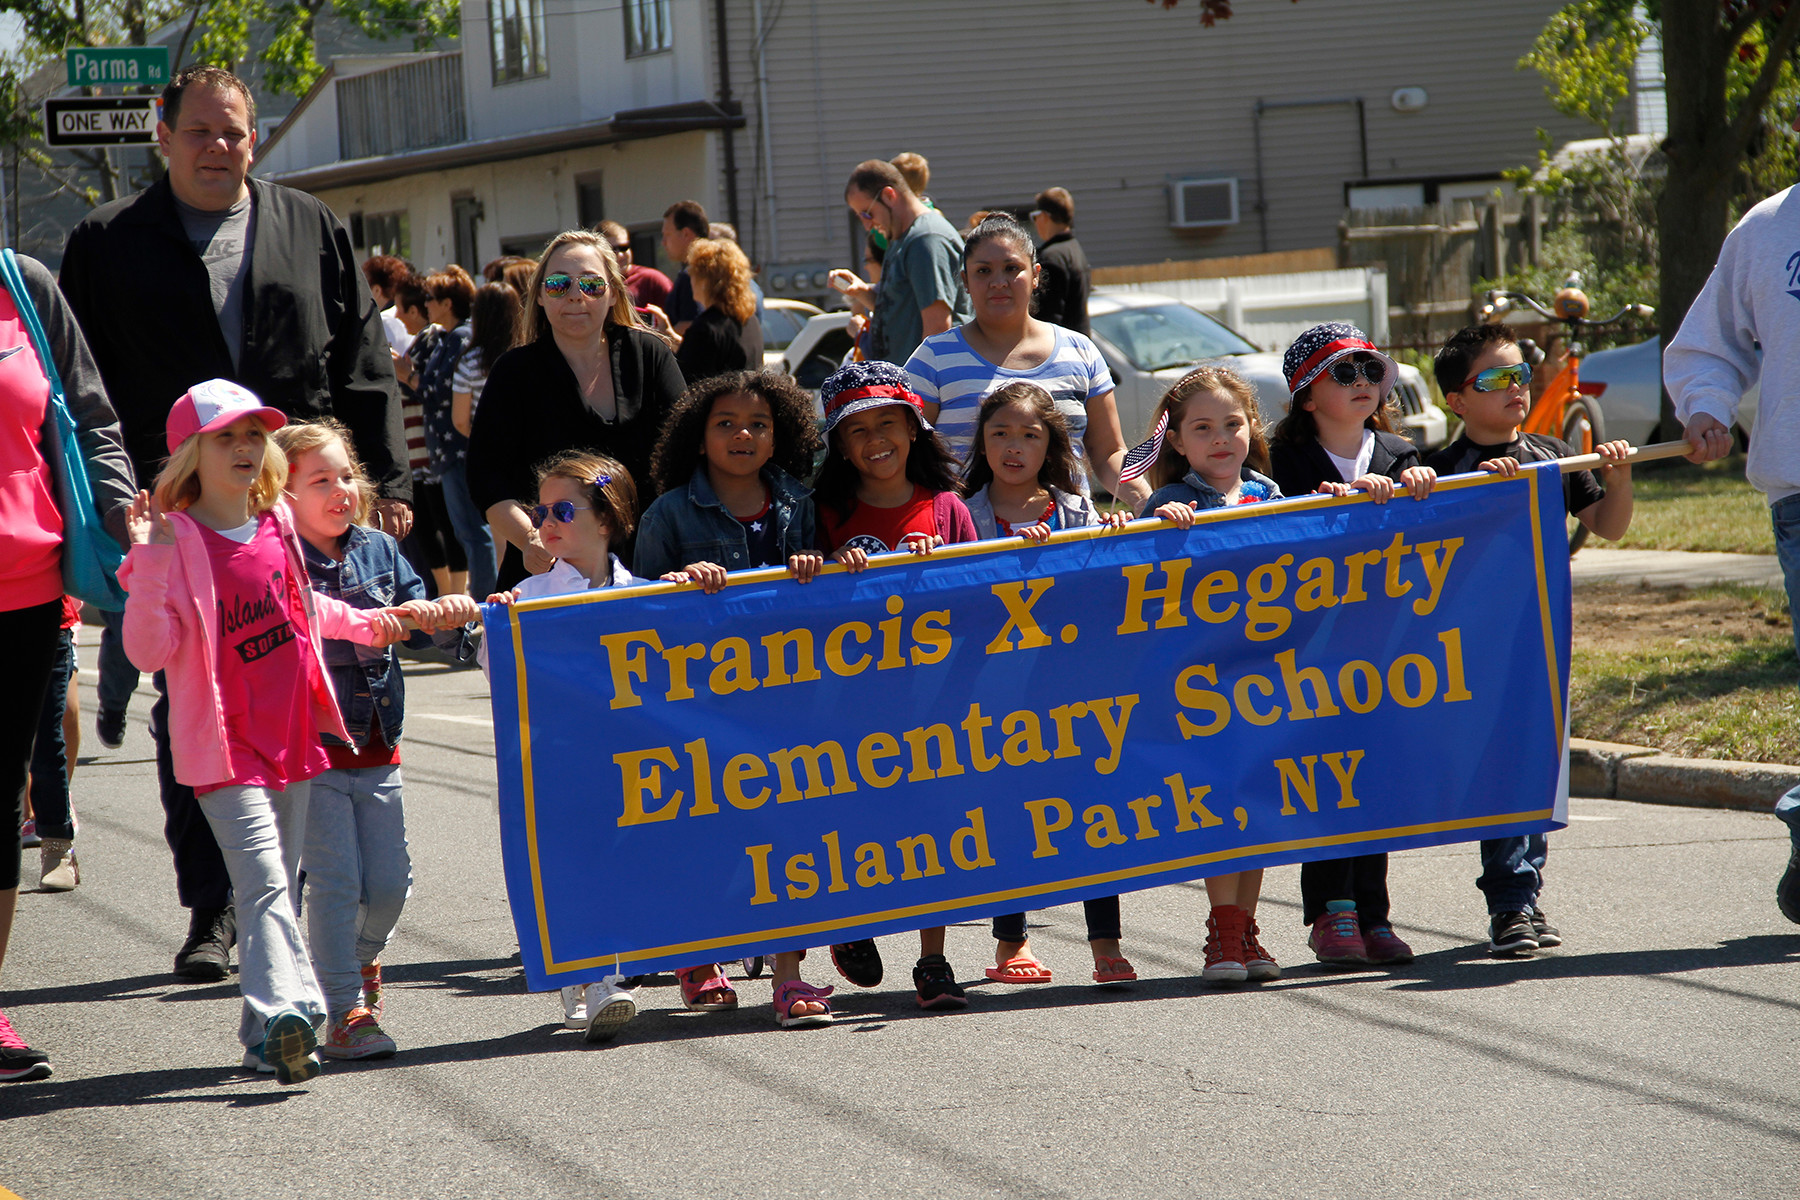 Students from Hegarty School joined the procession.